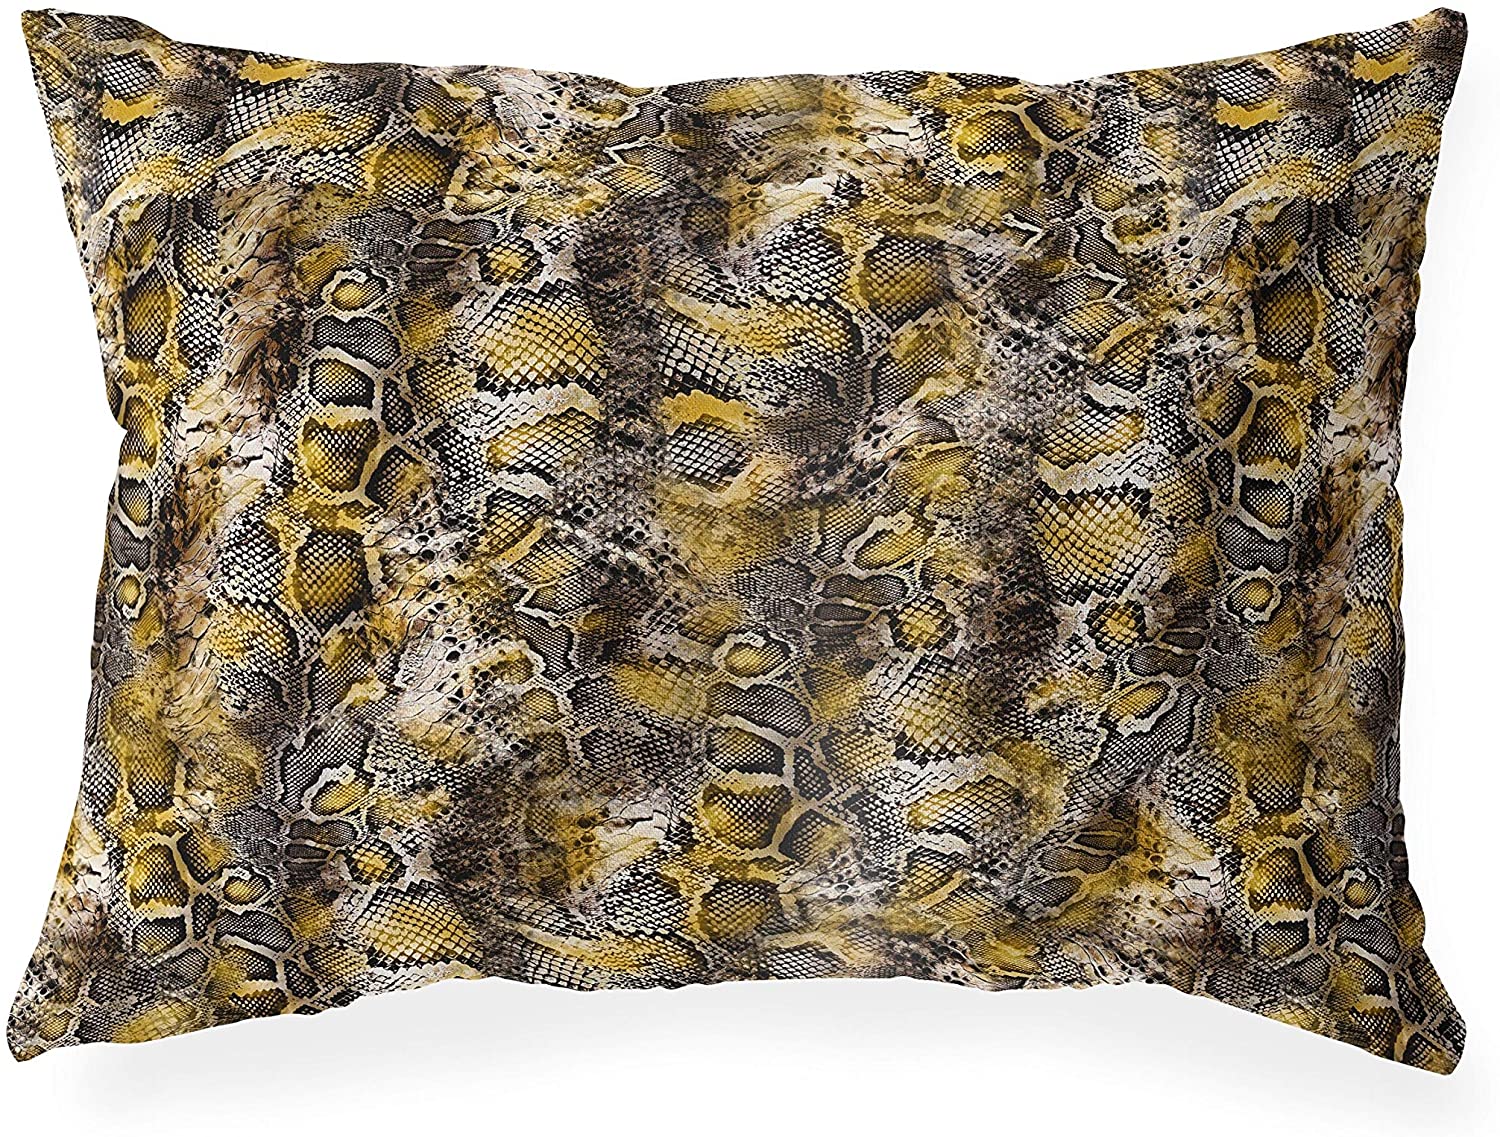 Viper Yellow Indoor|Outdoor Lumbar Pillow by Designs 20x14 Yellow Animal Modern Contemporary Polyester Removable Cover